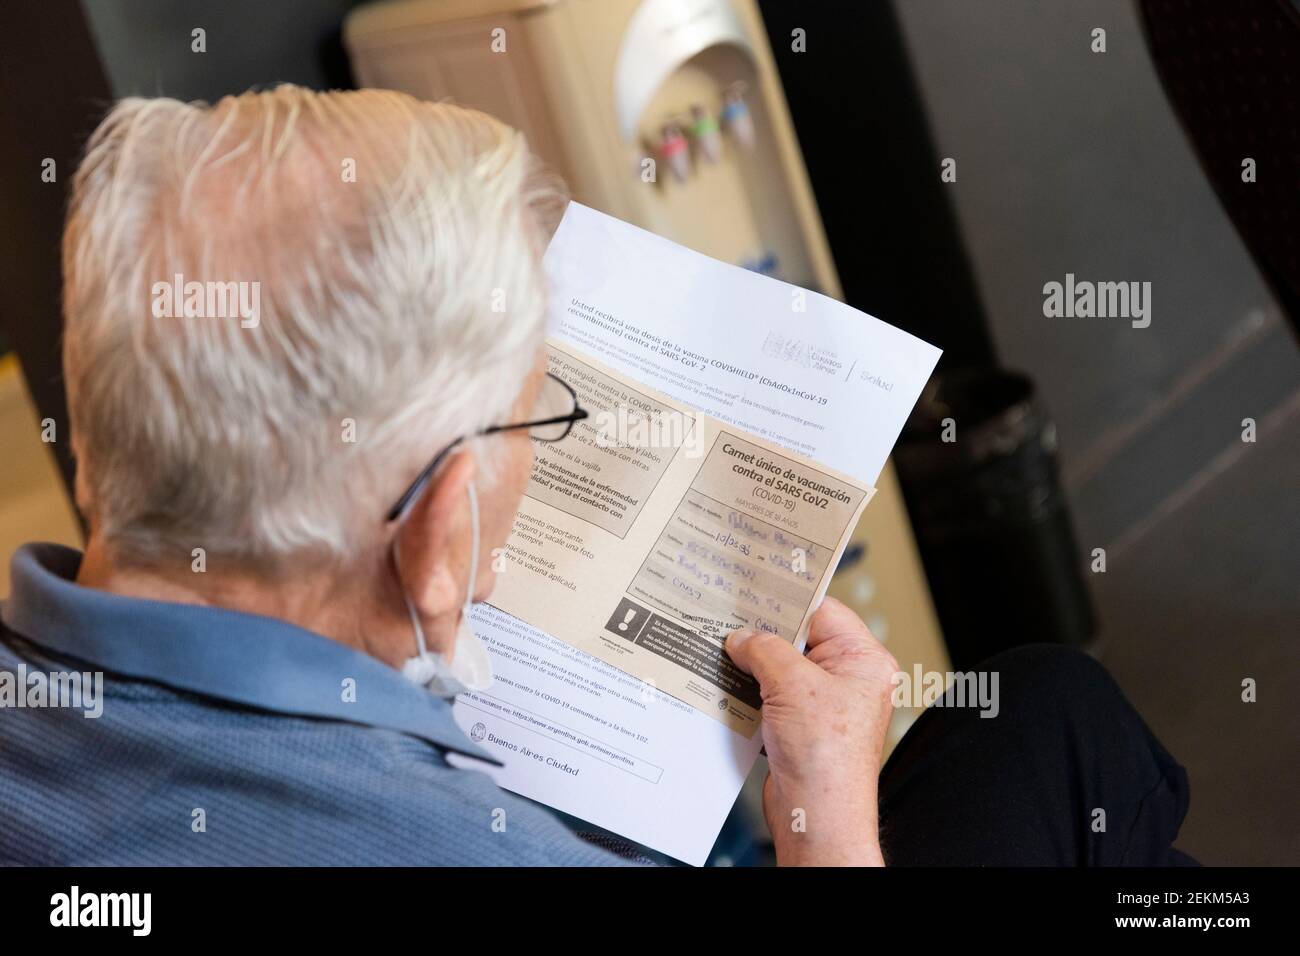 City of Buenos Aires, City of Buenos Aires, Argentina. 23rd Feb, 2021. INT. WorldNews. COVID-19. February 23, 2021. City of Buenos Aires, Argentina.- An old man reads his vaccine certificate for SARS CoV2 (COVID-19) on Feb 23, 2021, at a temporary Vaccination Center at Centro Cultural Recoleta, City of Buenos Aires, Argentina. Adults over 80 years old are being vaccinated for SARS CoV2 (COVID-19) since Feb 22, 2021 in City of Buenos Aires, Argentina. Credit: Julieta Ferrario/ZUMA Wire/Alamy Live News Stock Photo